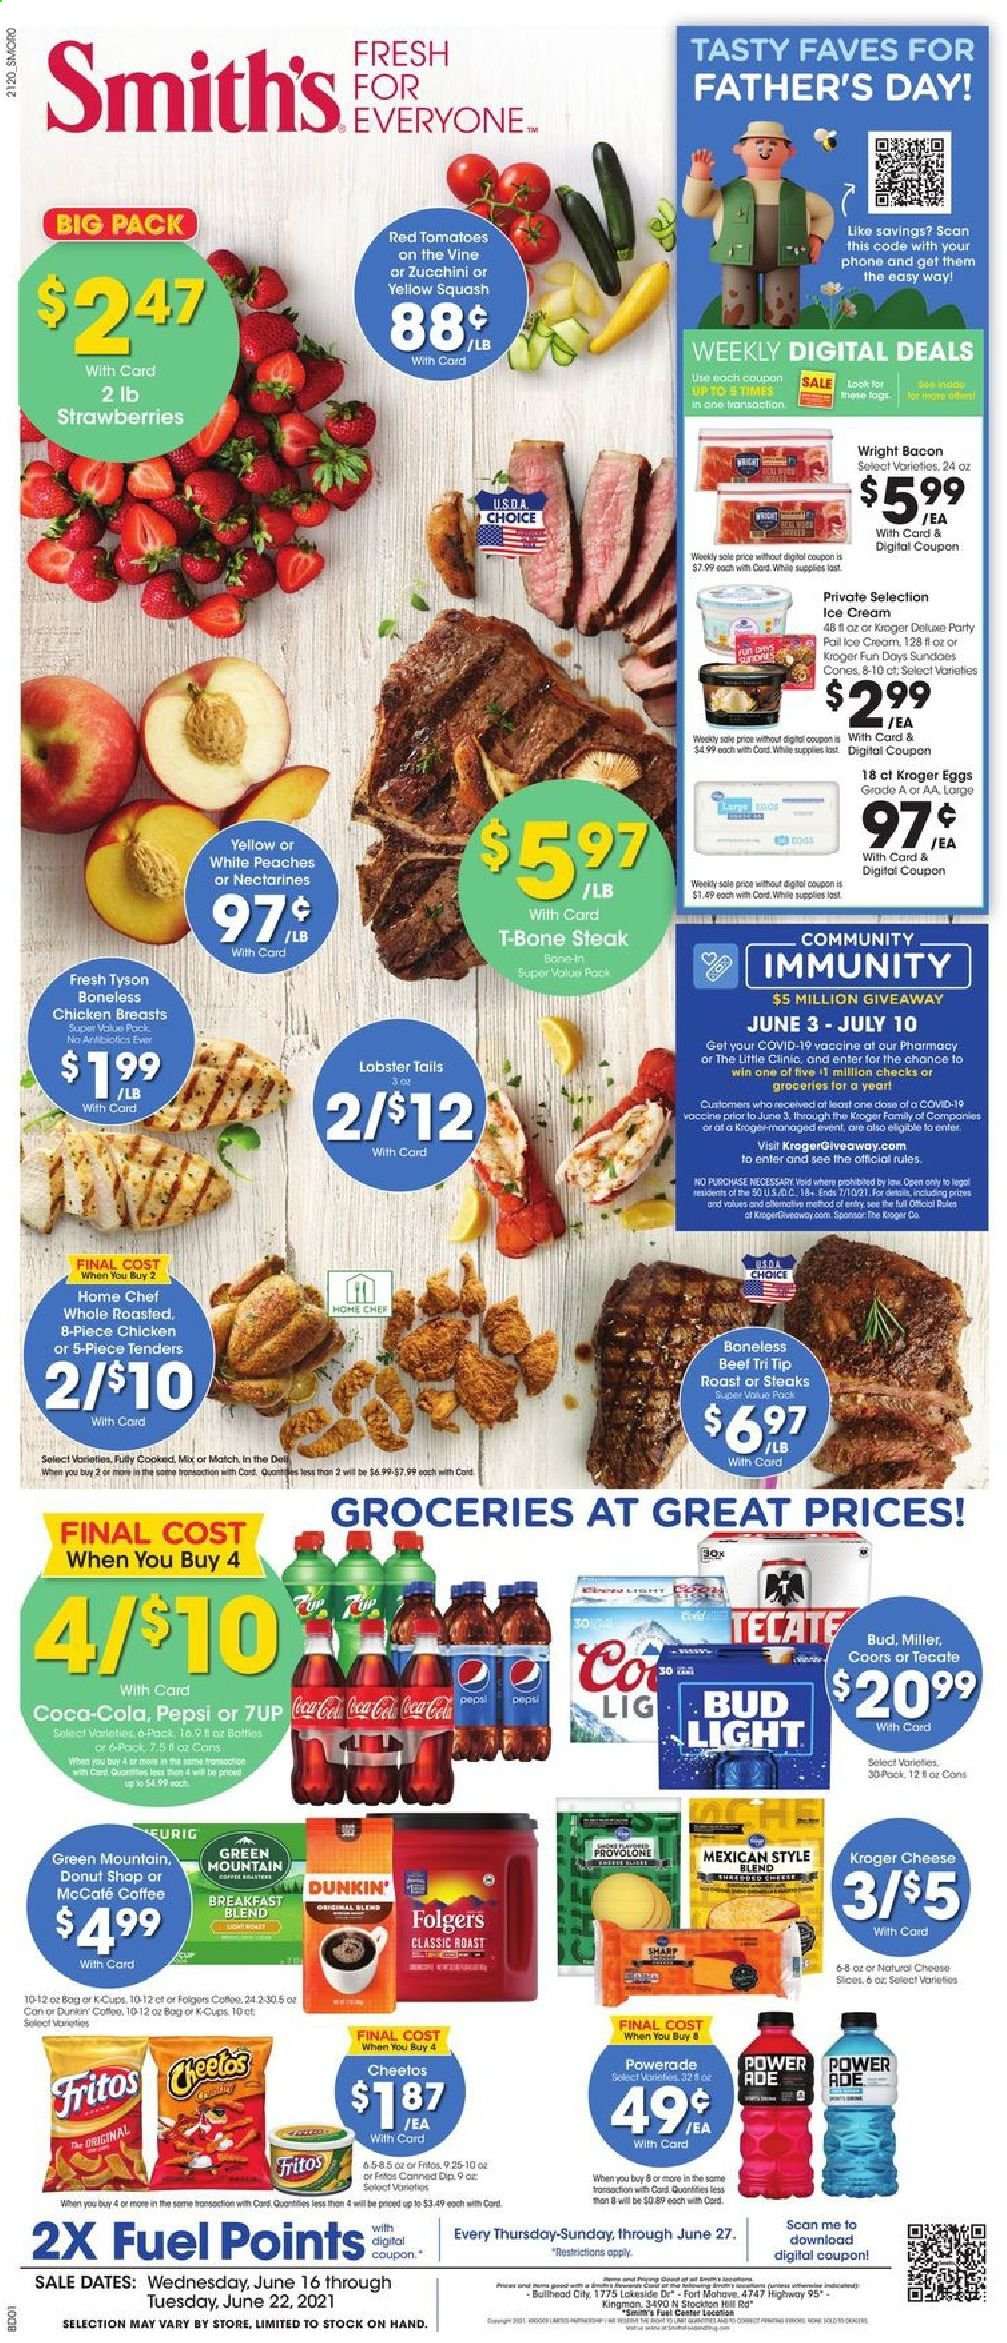 thumbnail - Smith's Flyer - 06/16/2021 - 06/22/2021 - Sales products - tomatoes, zucchini, yellow squash, strawberries, lobster, lobster tail, bacon, cheese, Provolone, eggs, ice cream, Fritos, Cheetos, Smith's, Coca-Cola, Powerade, Pepsi, 7UP, coffee, Folgers, coffee capsules, K-Cups, breakfast blend, Green Mountain, beer, Coors, Bud Light, Miller, chicken breasts, beef meat, t-bone steak, steak, Sharp, nectarines, peaches. Page 1.